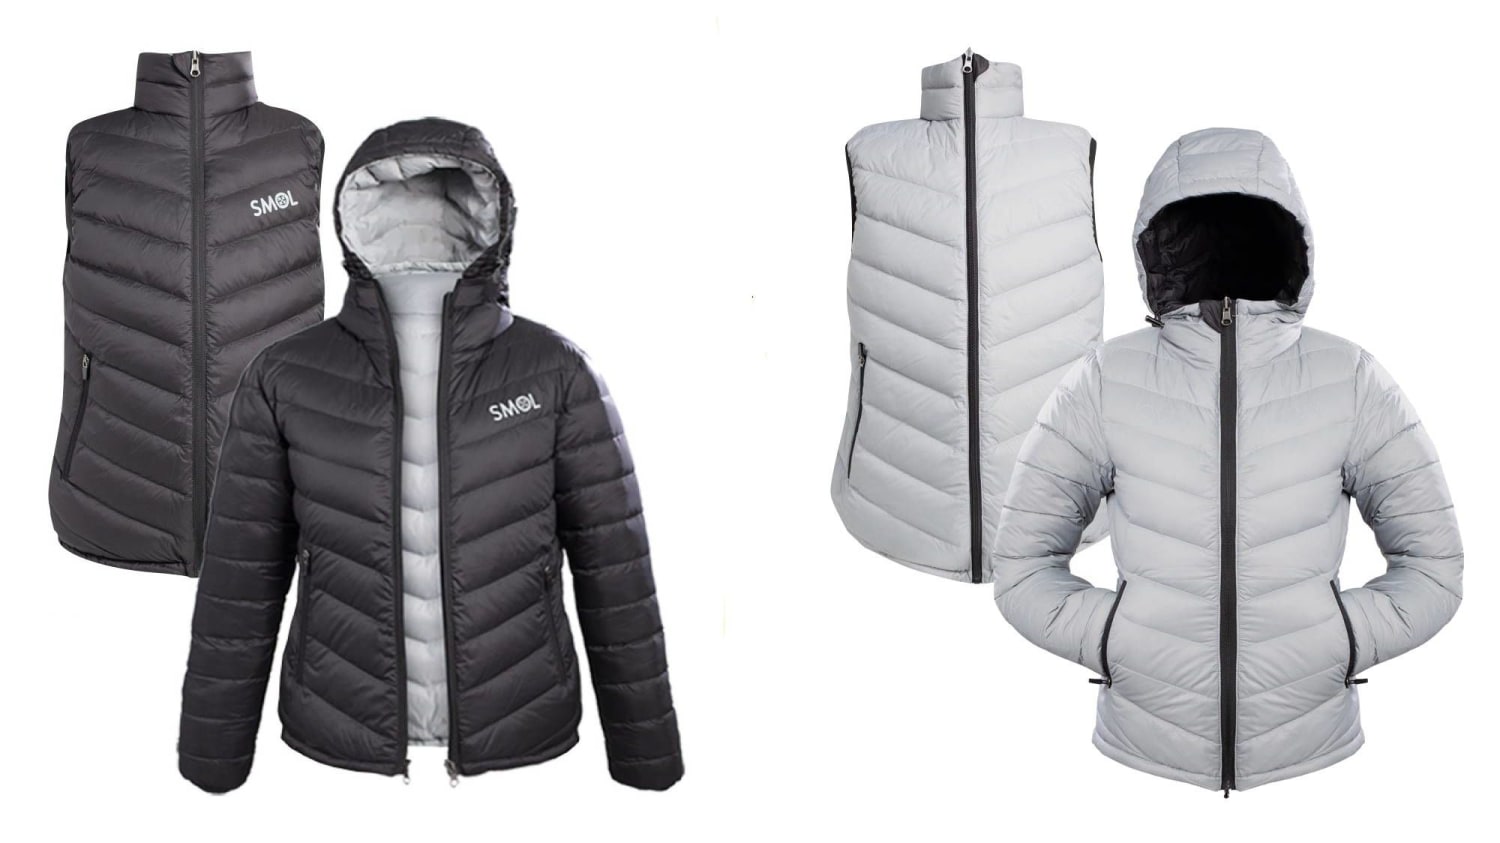 This Six-in-One Jacket and Vest Combo Is Versatile in All Kinds of Weather